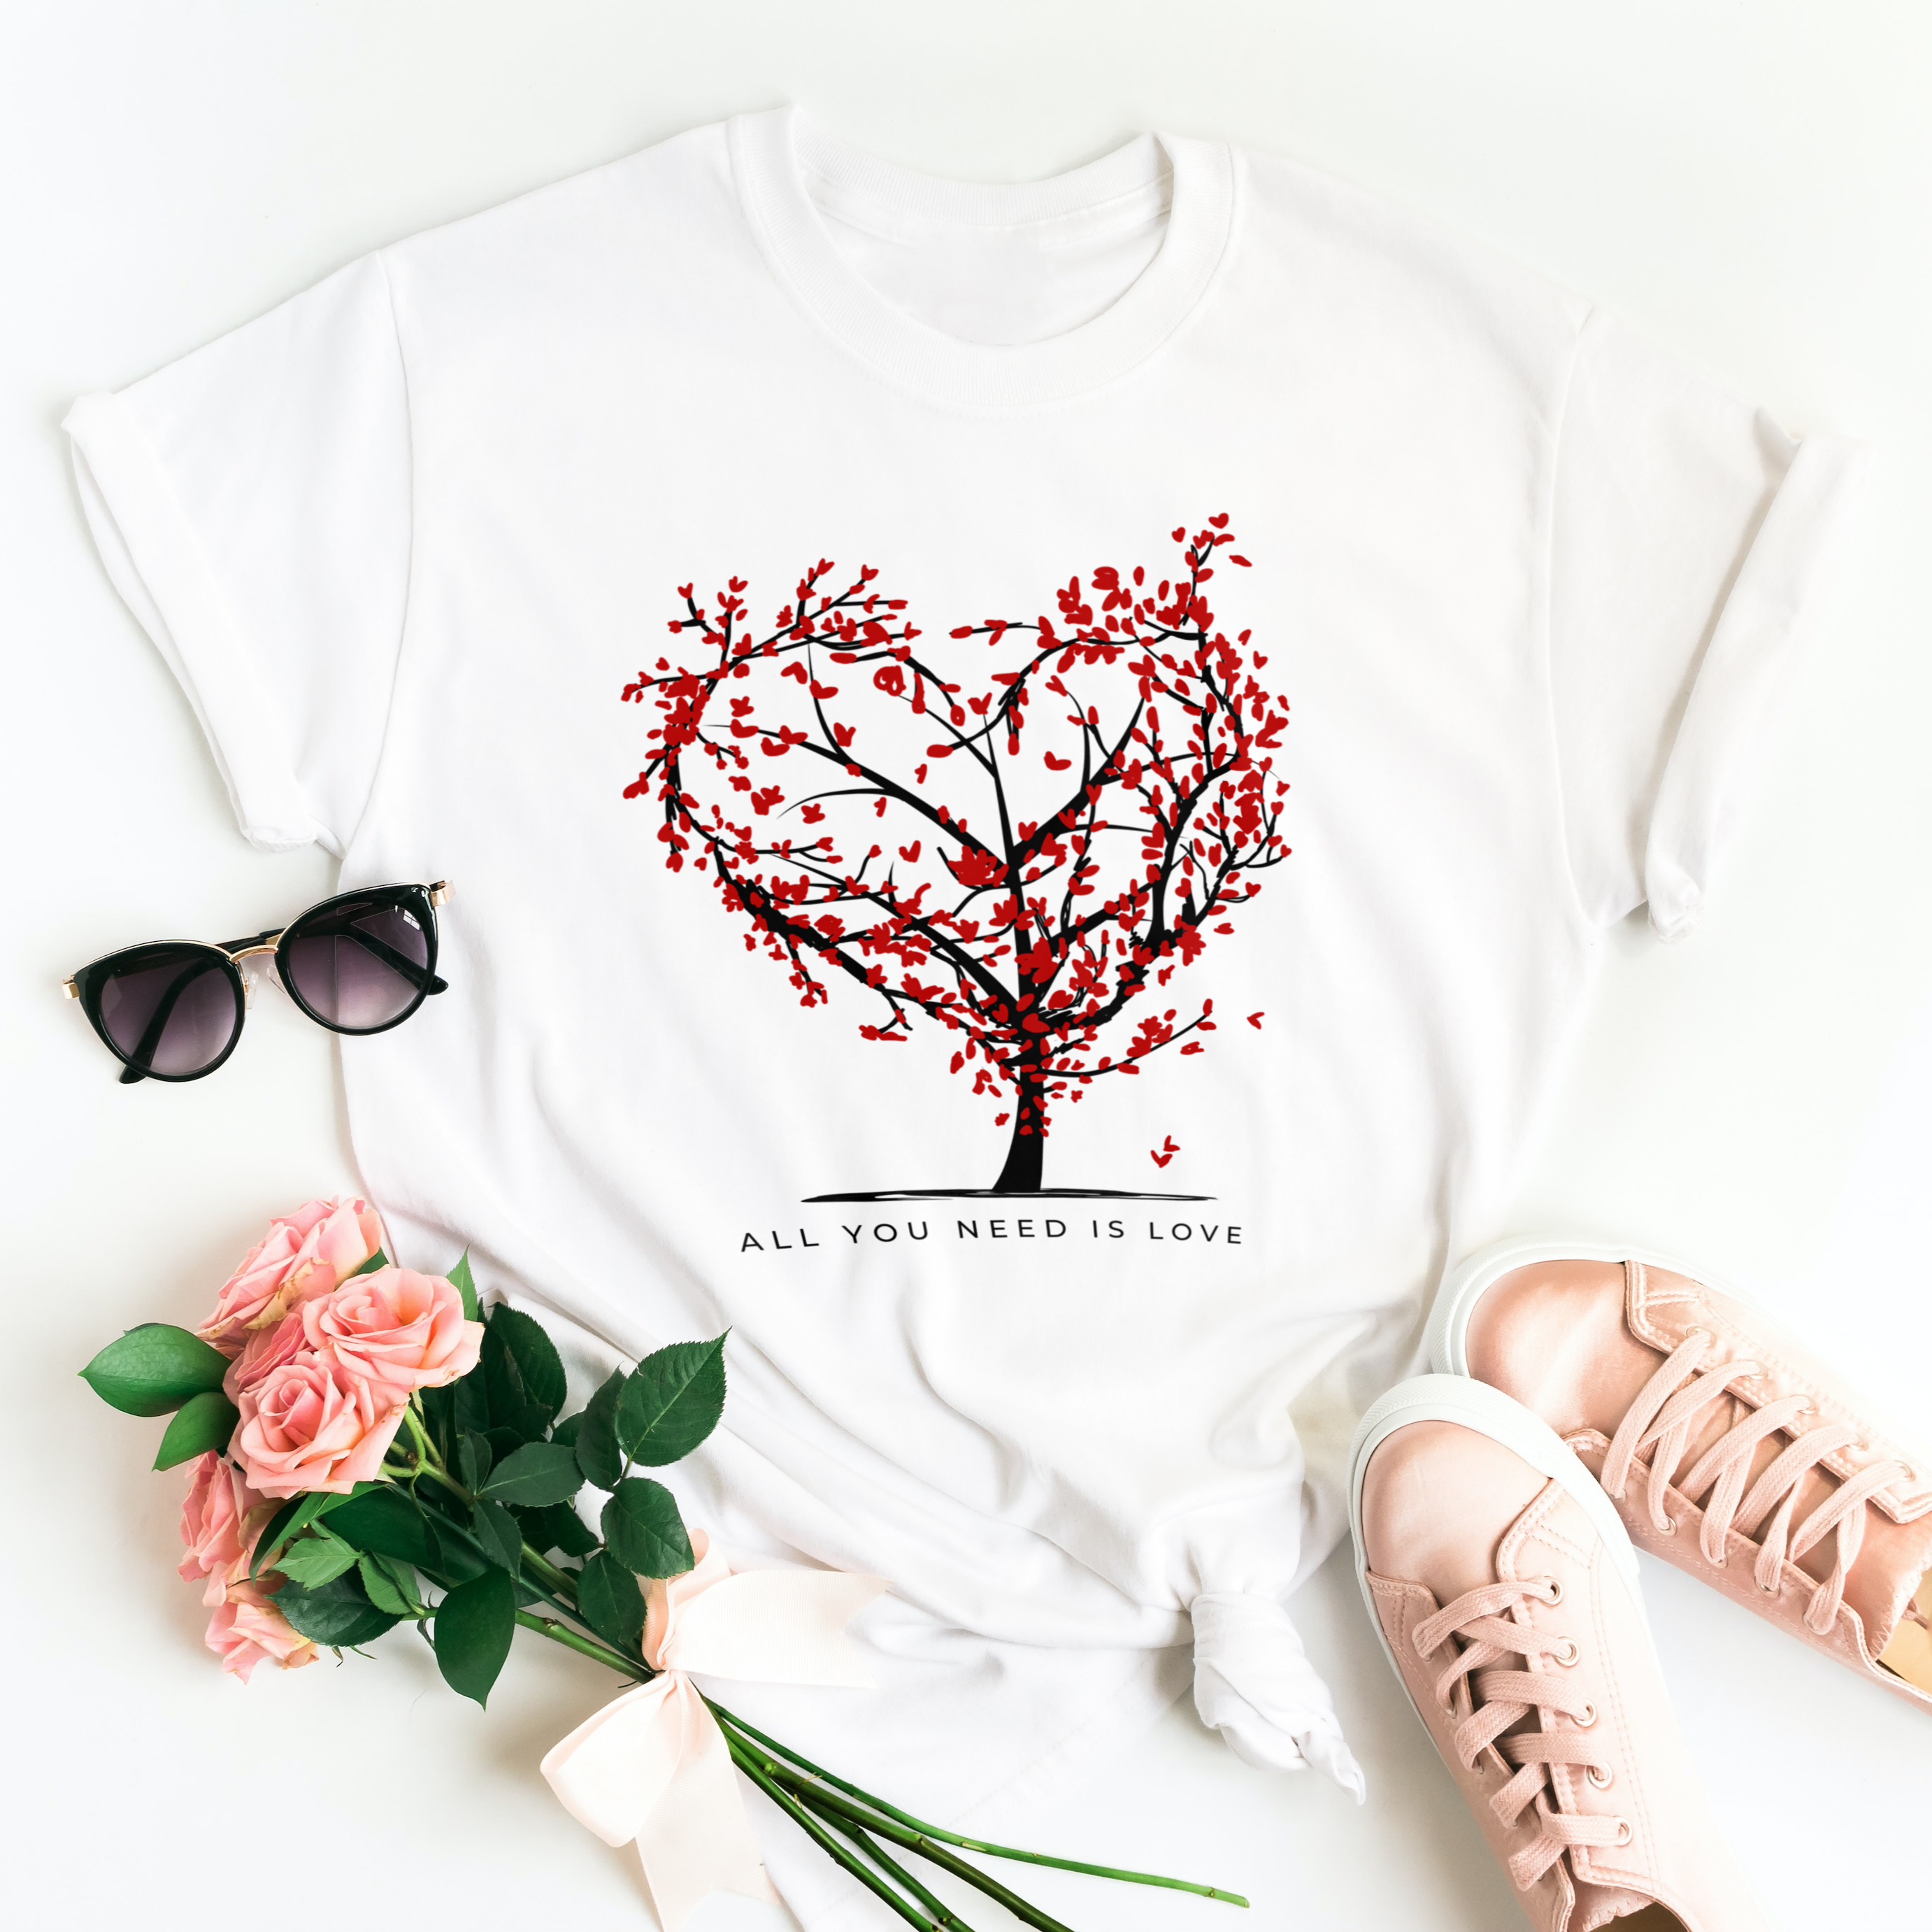 Story of Awakening Lifestyle Community Spirituality Relationships Love Light Meditation Oneness Earth Balance Healing Shop Store Charity Tree Nature Read Write T shirt Tops Tees Clothing Women Horoscope All you need is love quote Valentines Day 